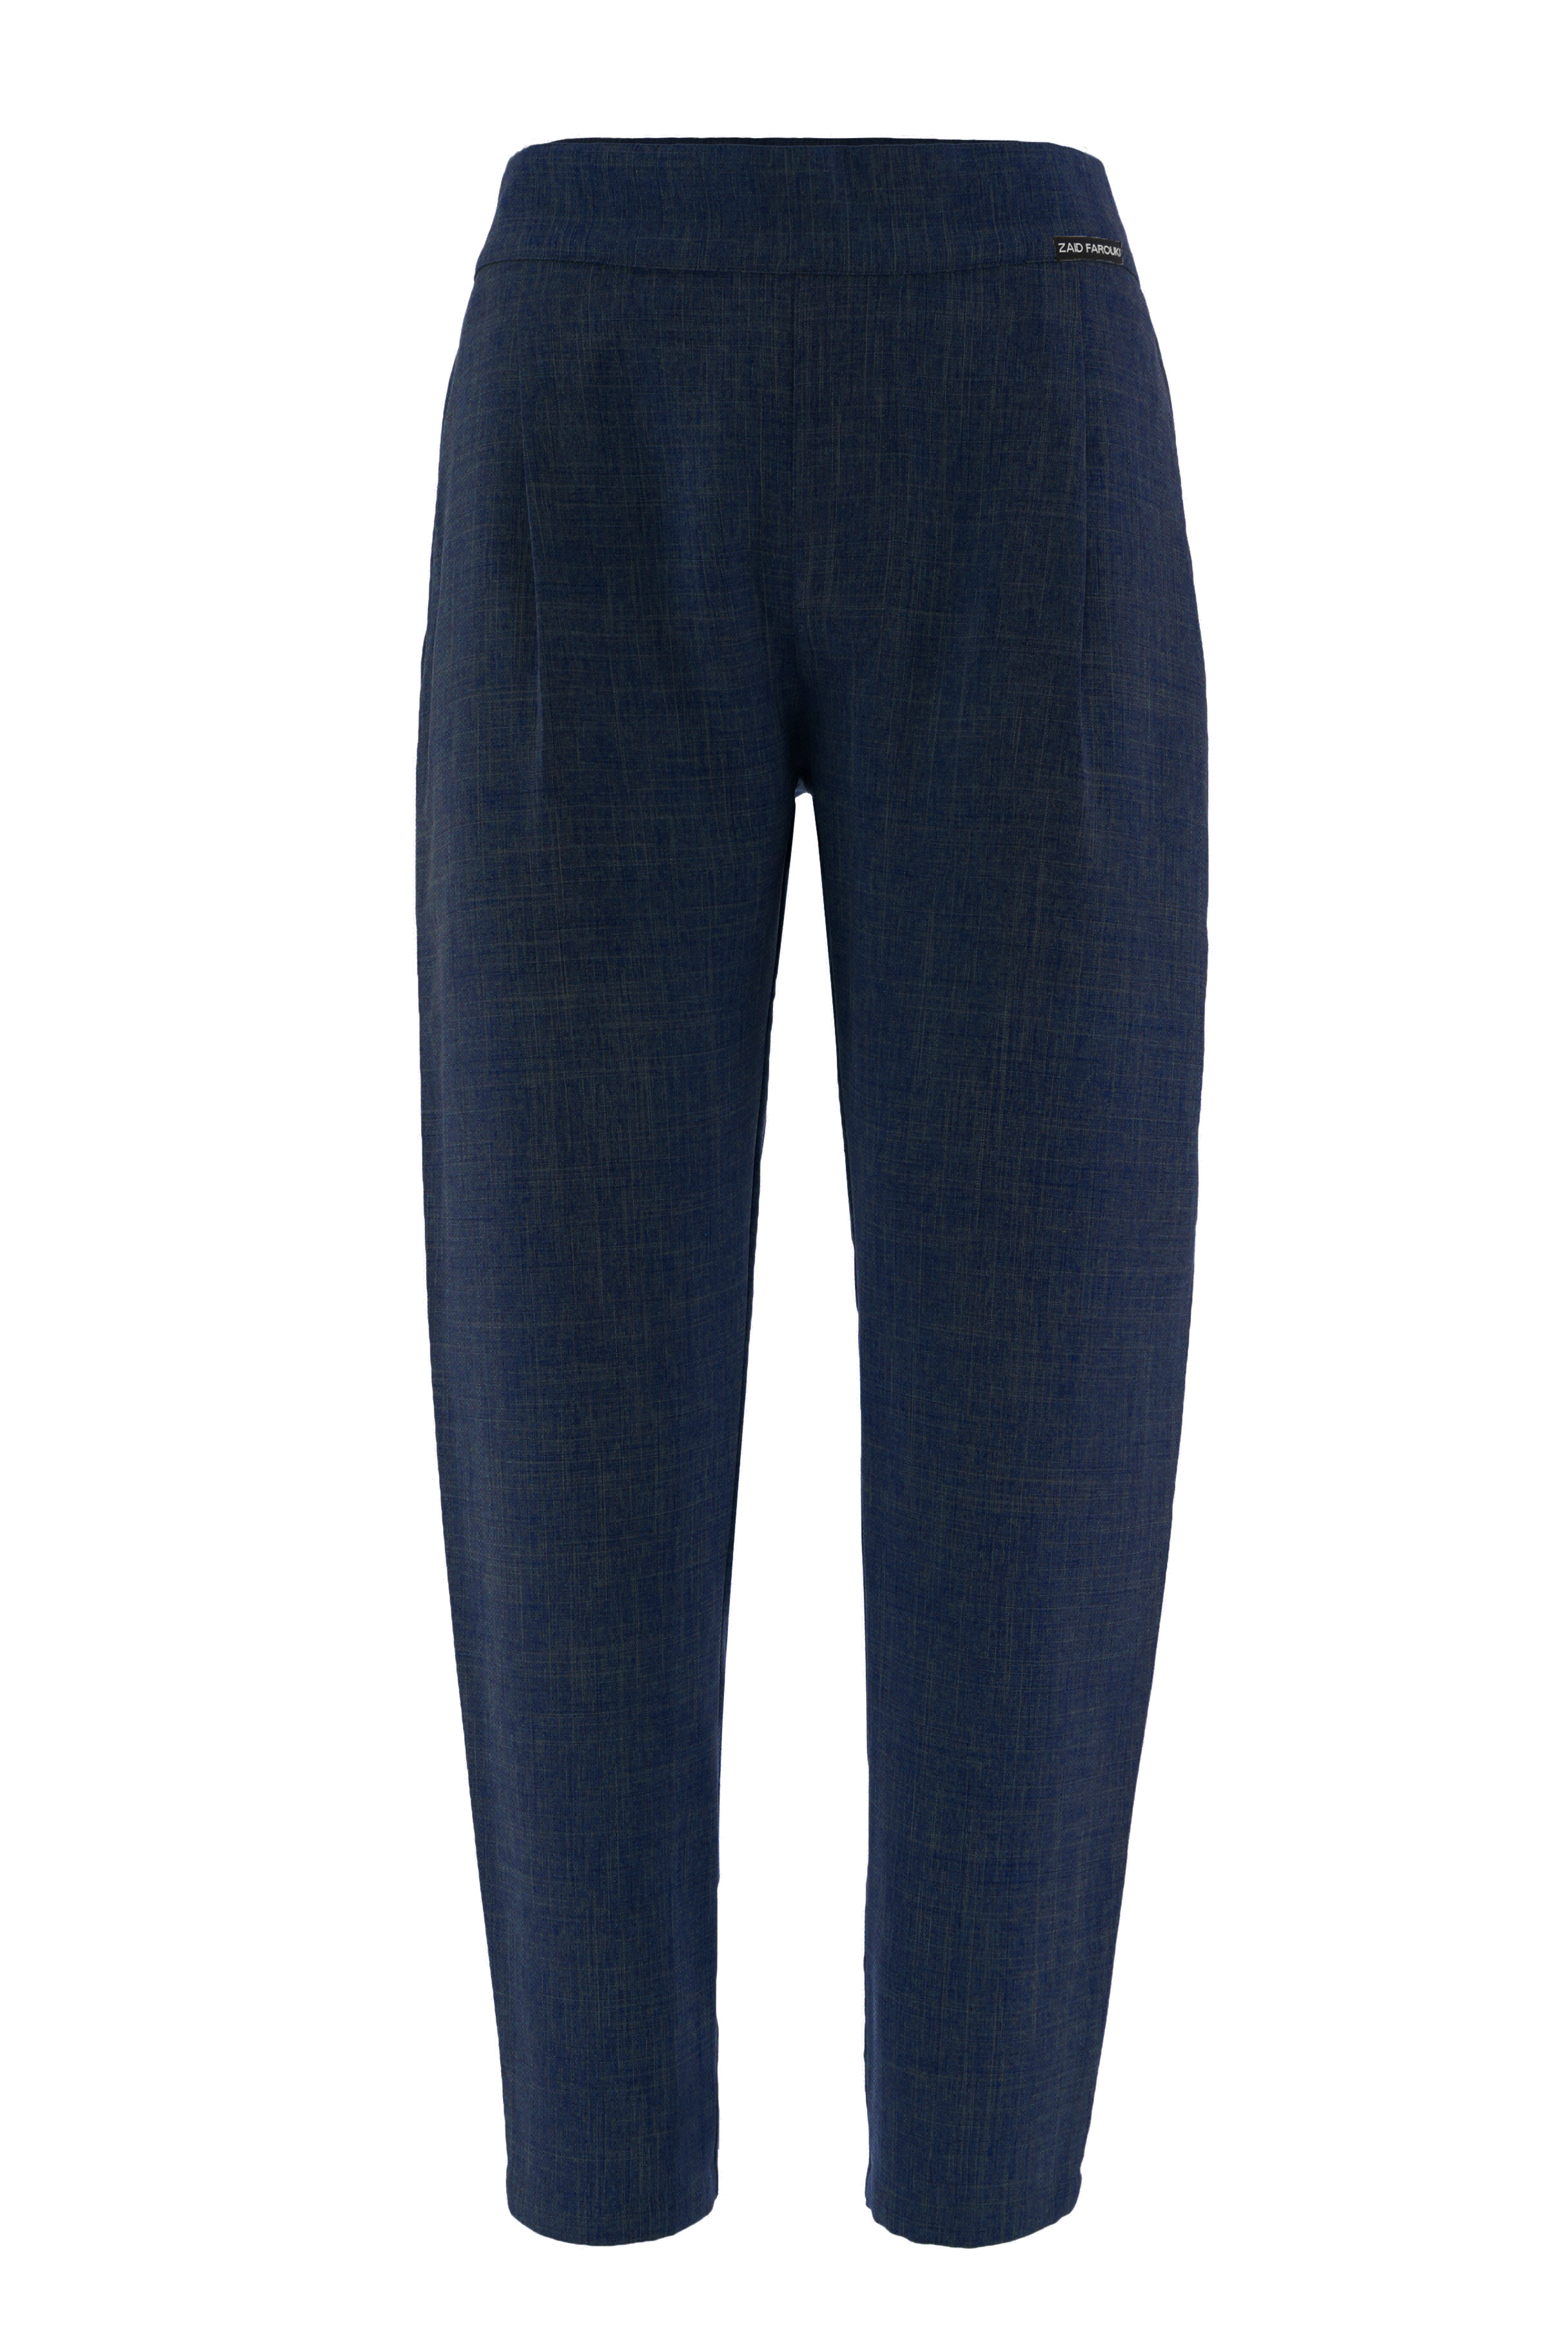 Navy Blue Linden Tailored Trousers